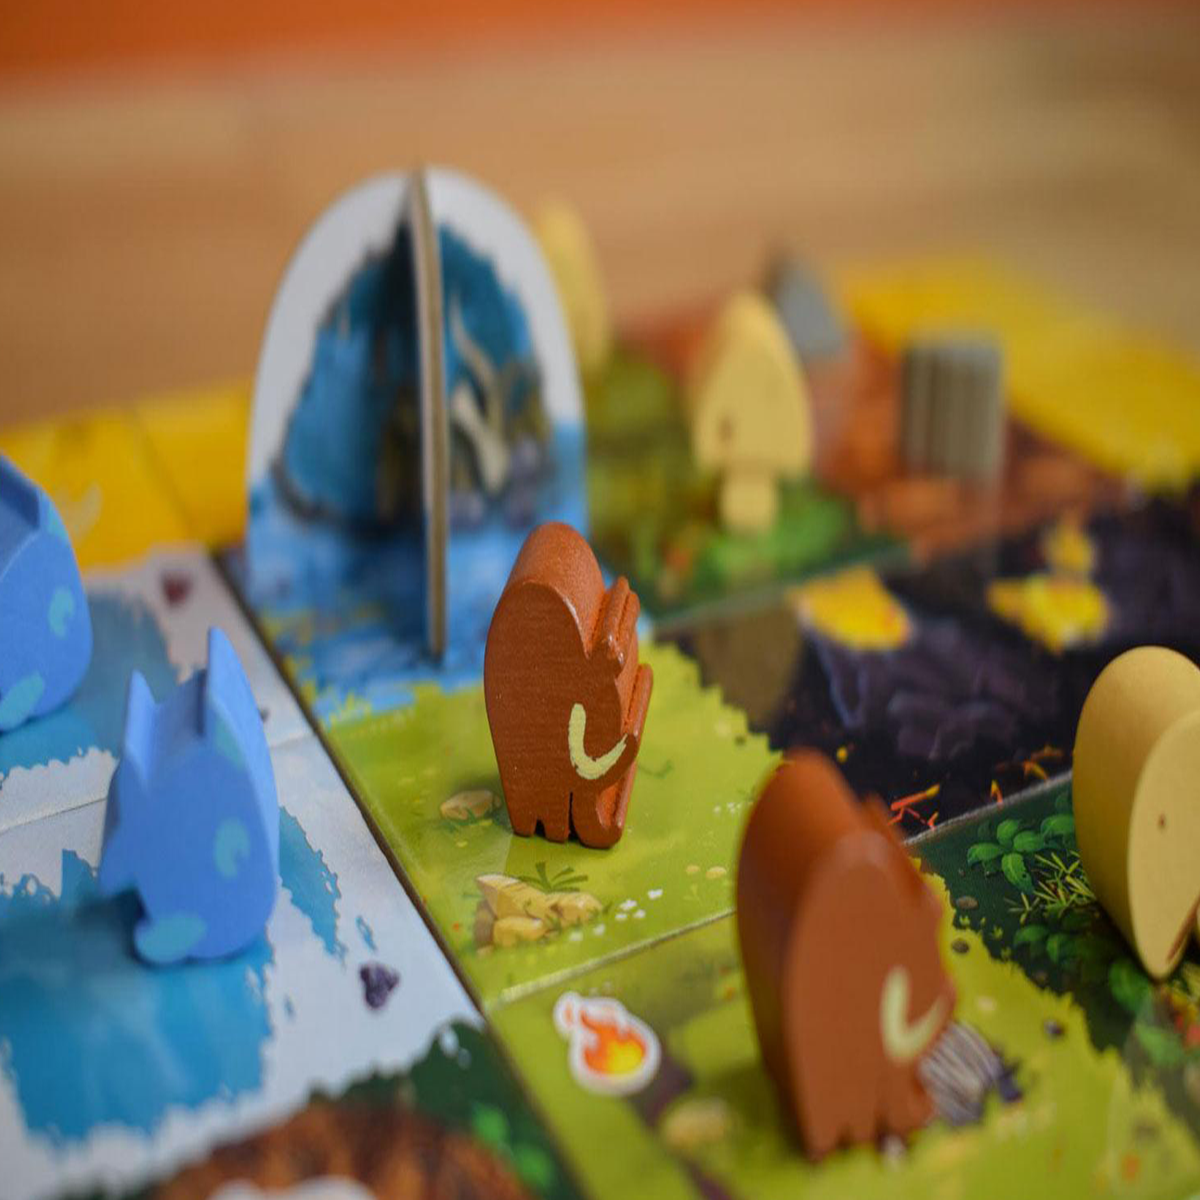 Kingdomino Origins isn't quite a full evolutionary step for the excellent  board game series